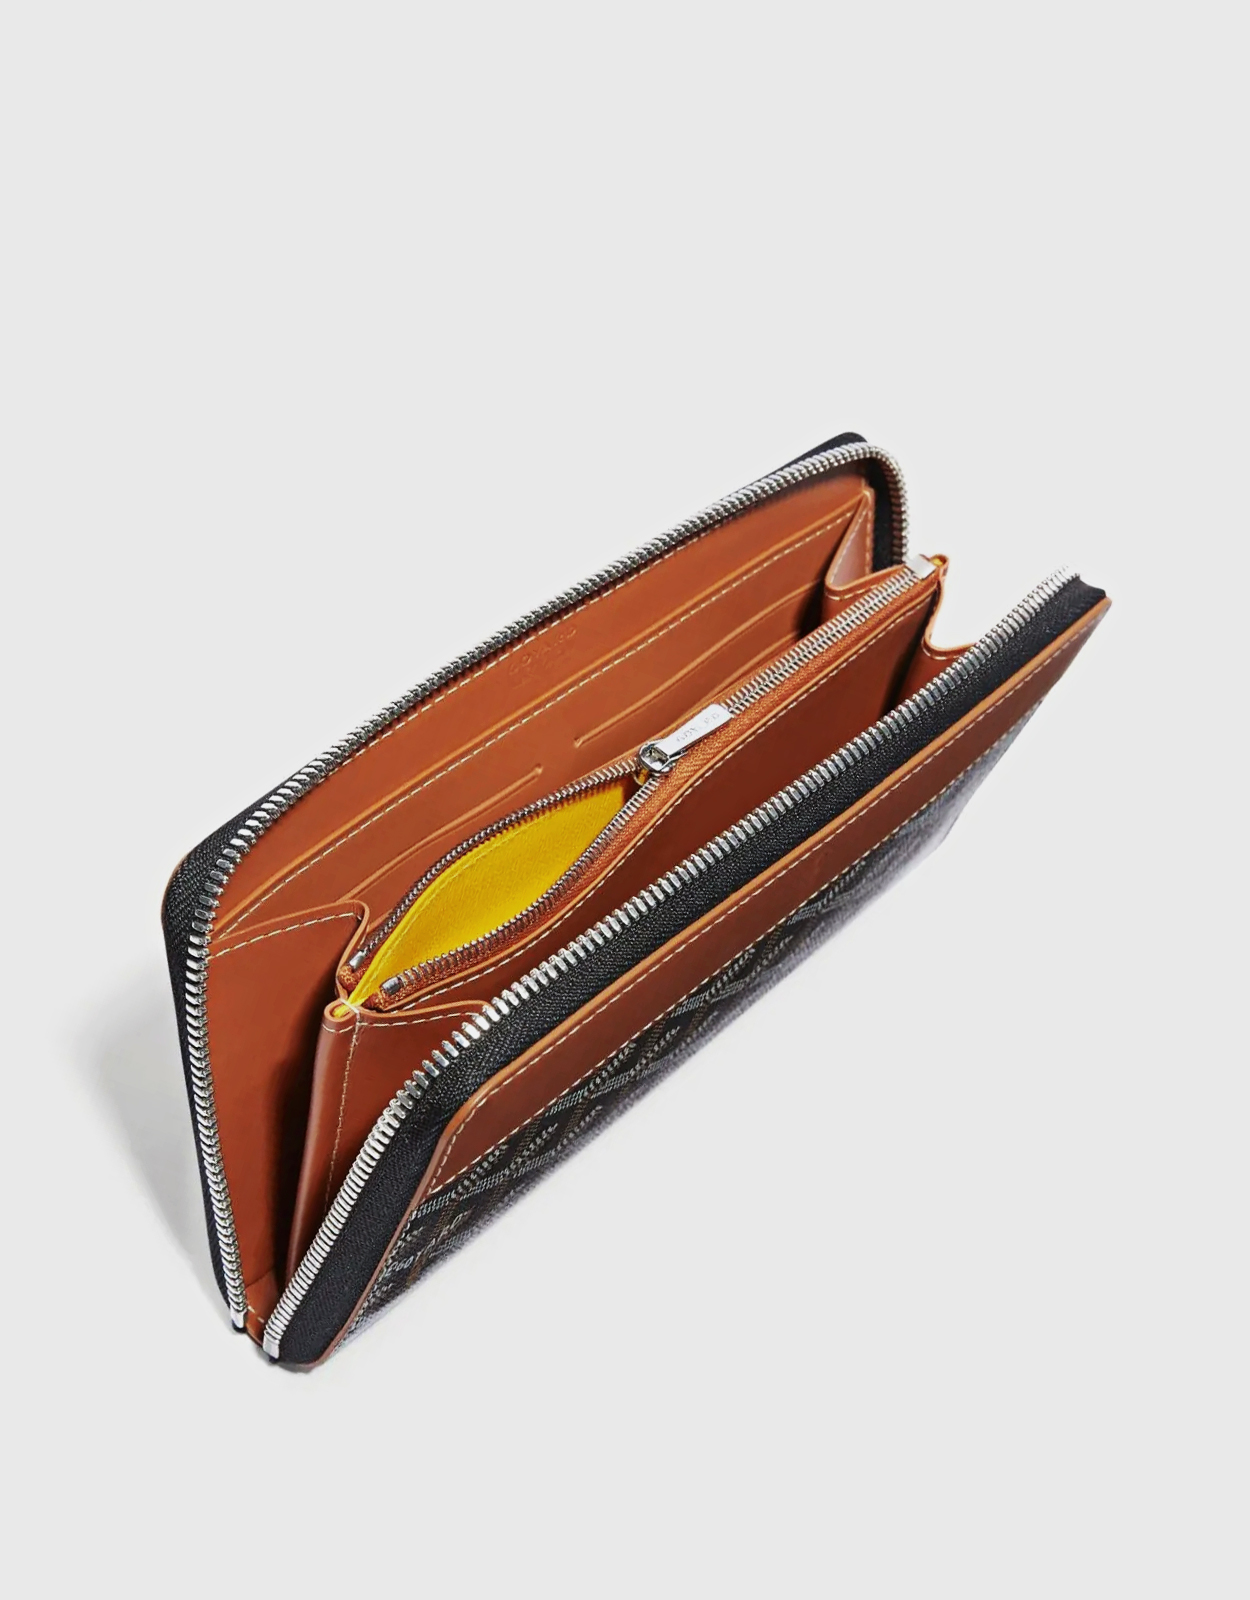 GoyardOfficial on X: The Matignon range of wallets welcomes a new